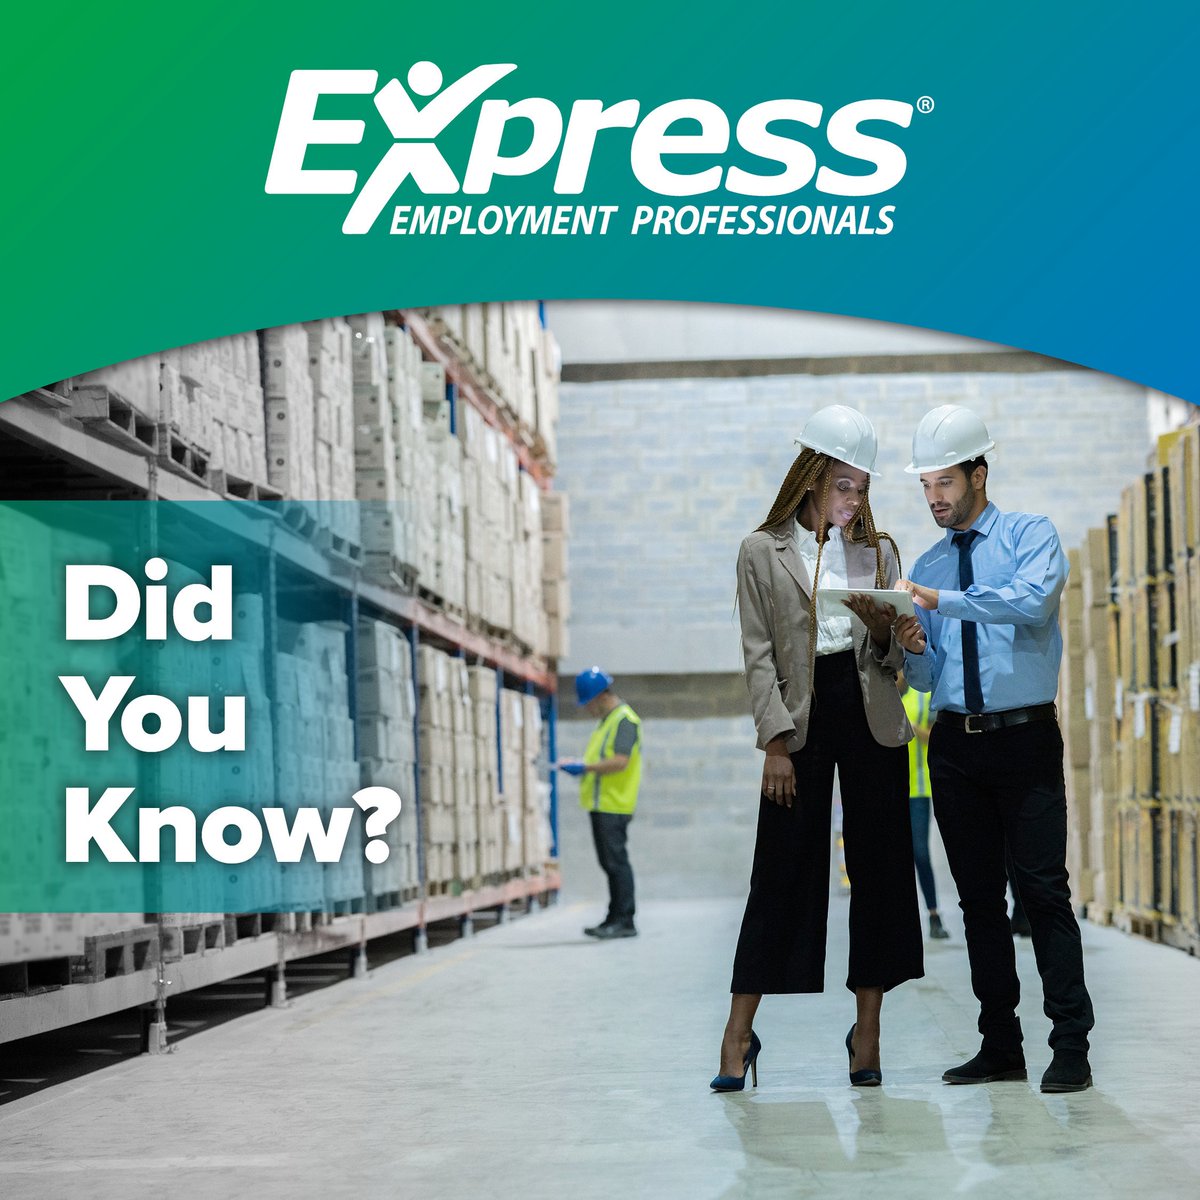 Did you know that 85% of hiring managers expect challenges in hiring over the next year?
We’re ready to help with all your Skilled Trades staffing needs. Call us today at 970-242-4500 to get started! #ExpressPros #HiringSolutions #HiringChallenges #SkilledTrades #Hiring